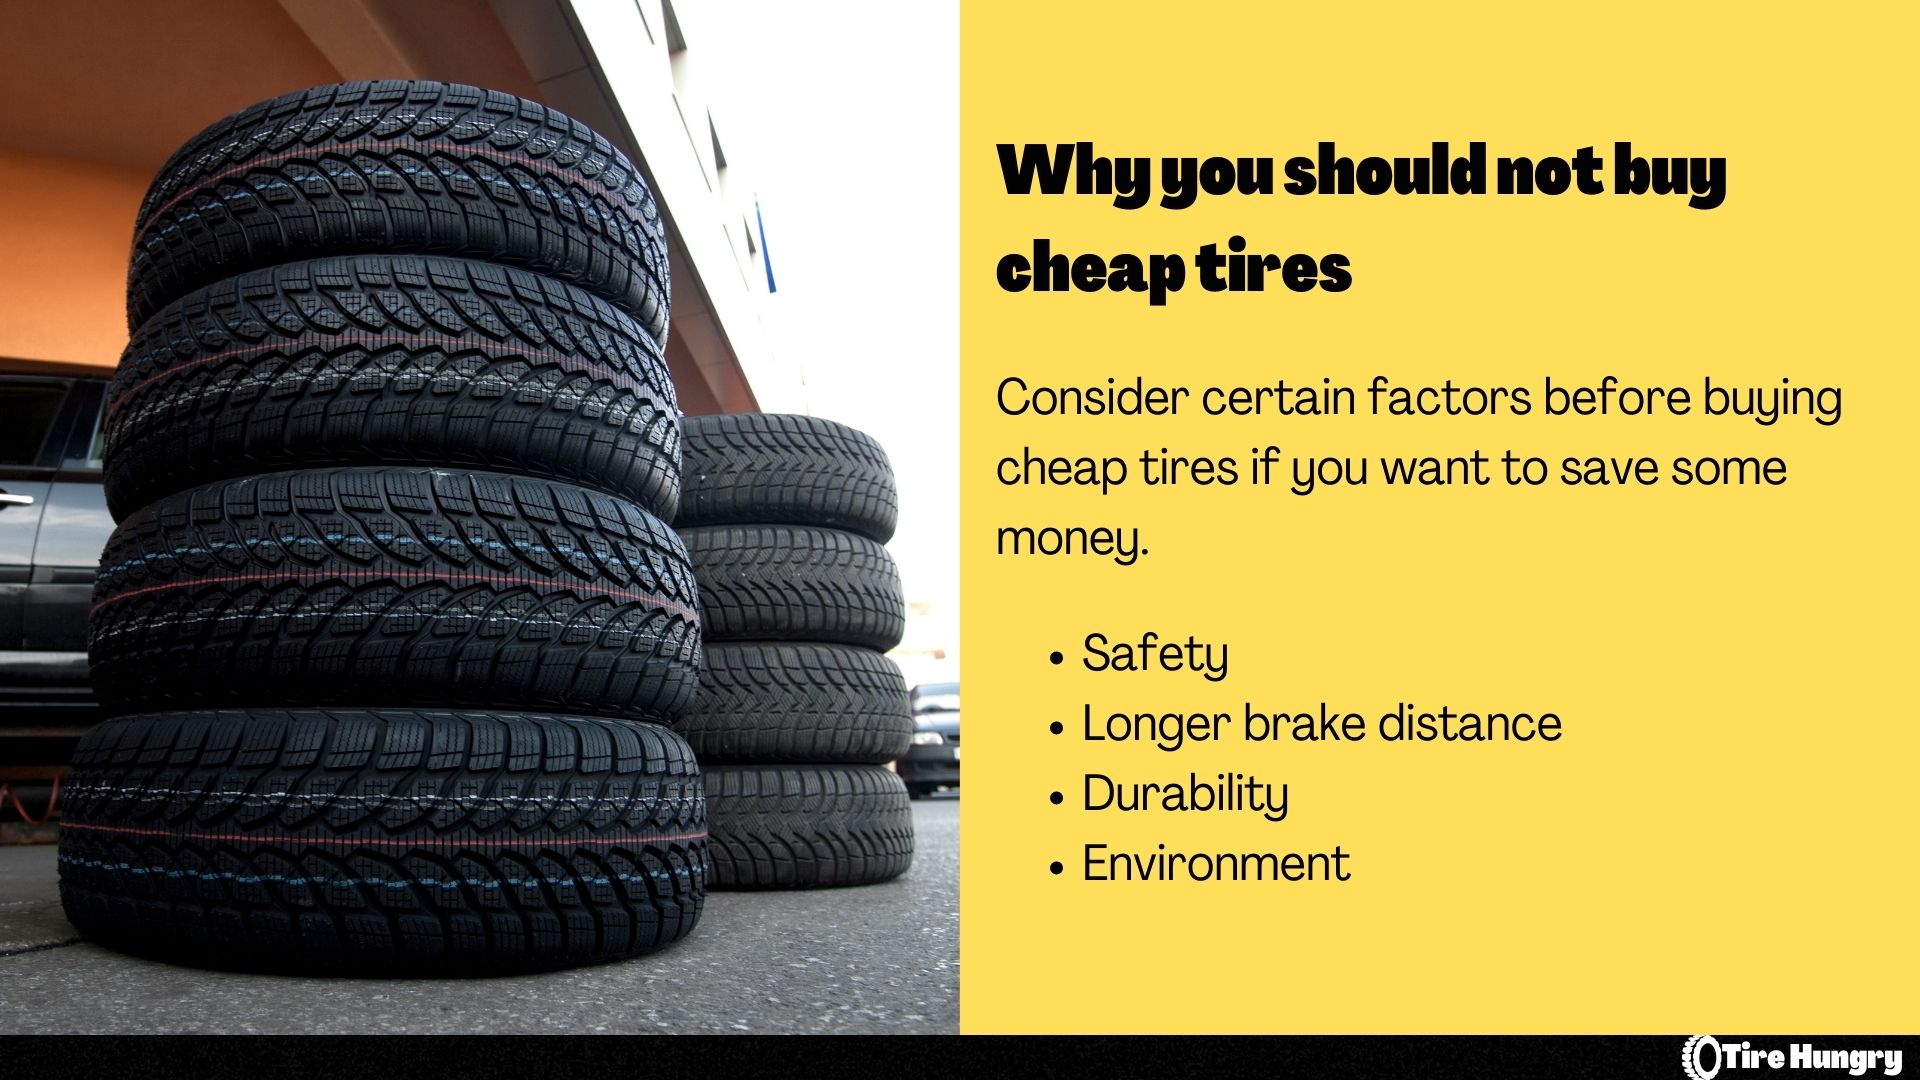 Why you should not buy cheap tires